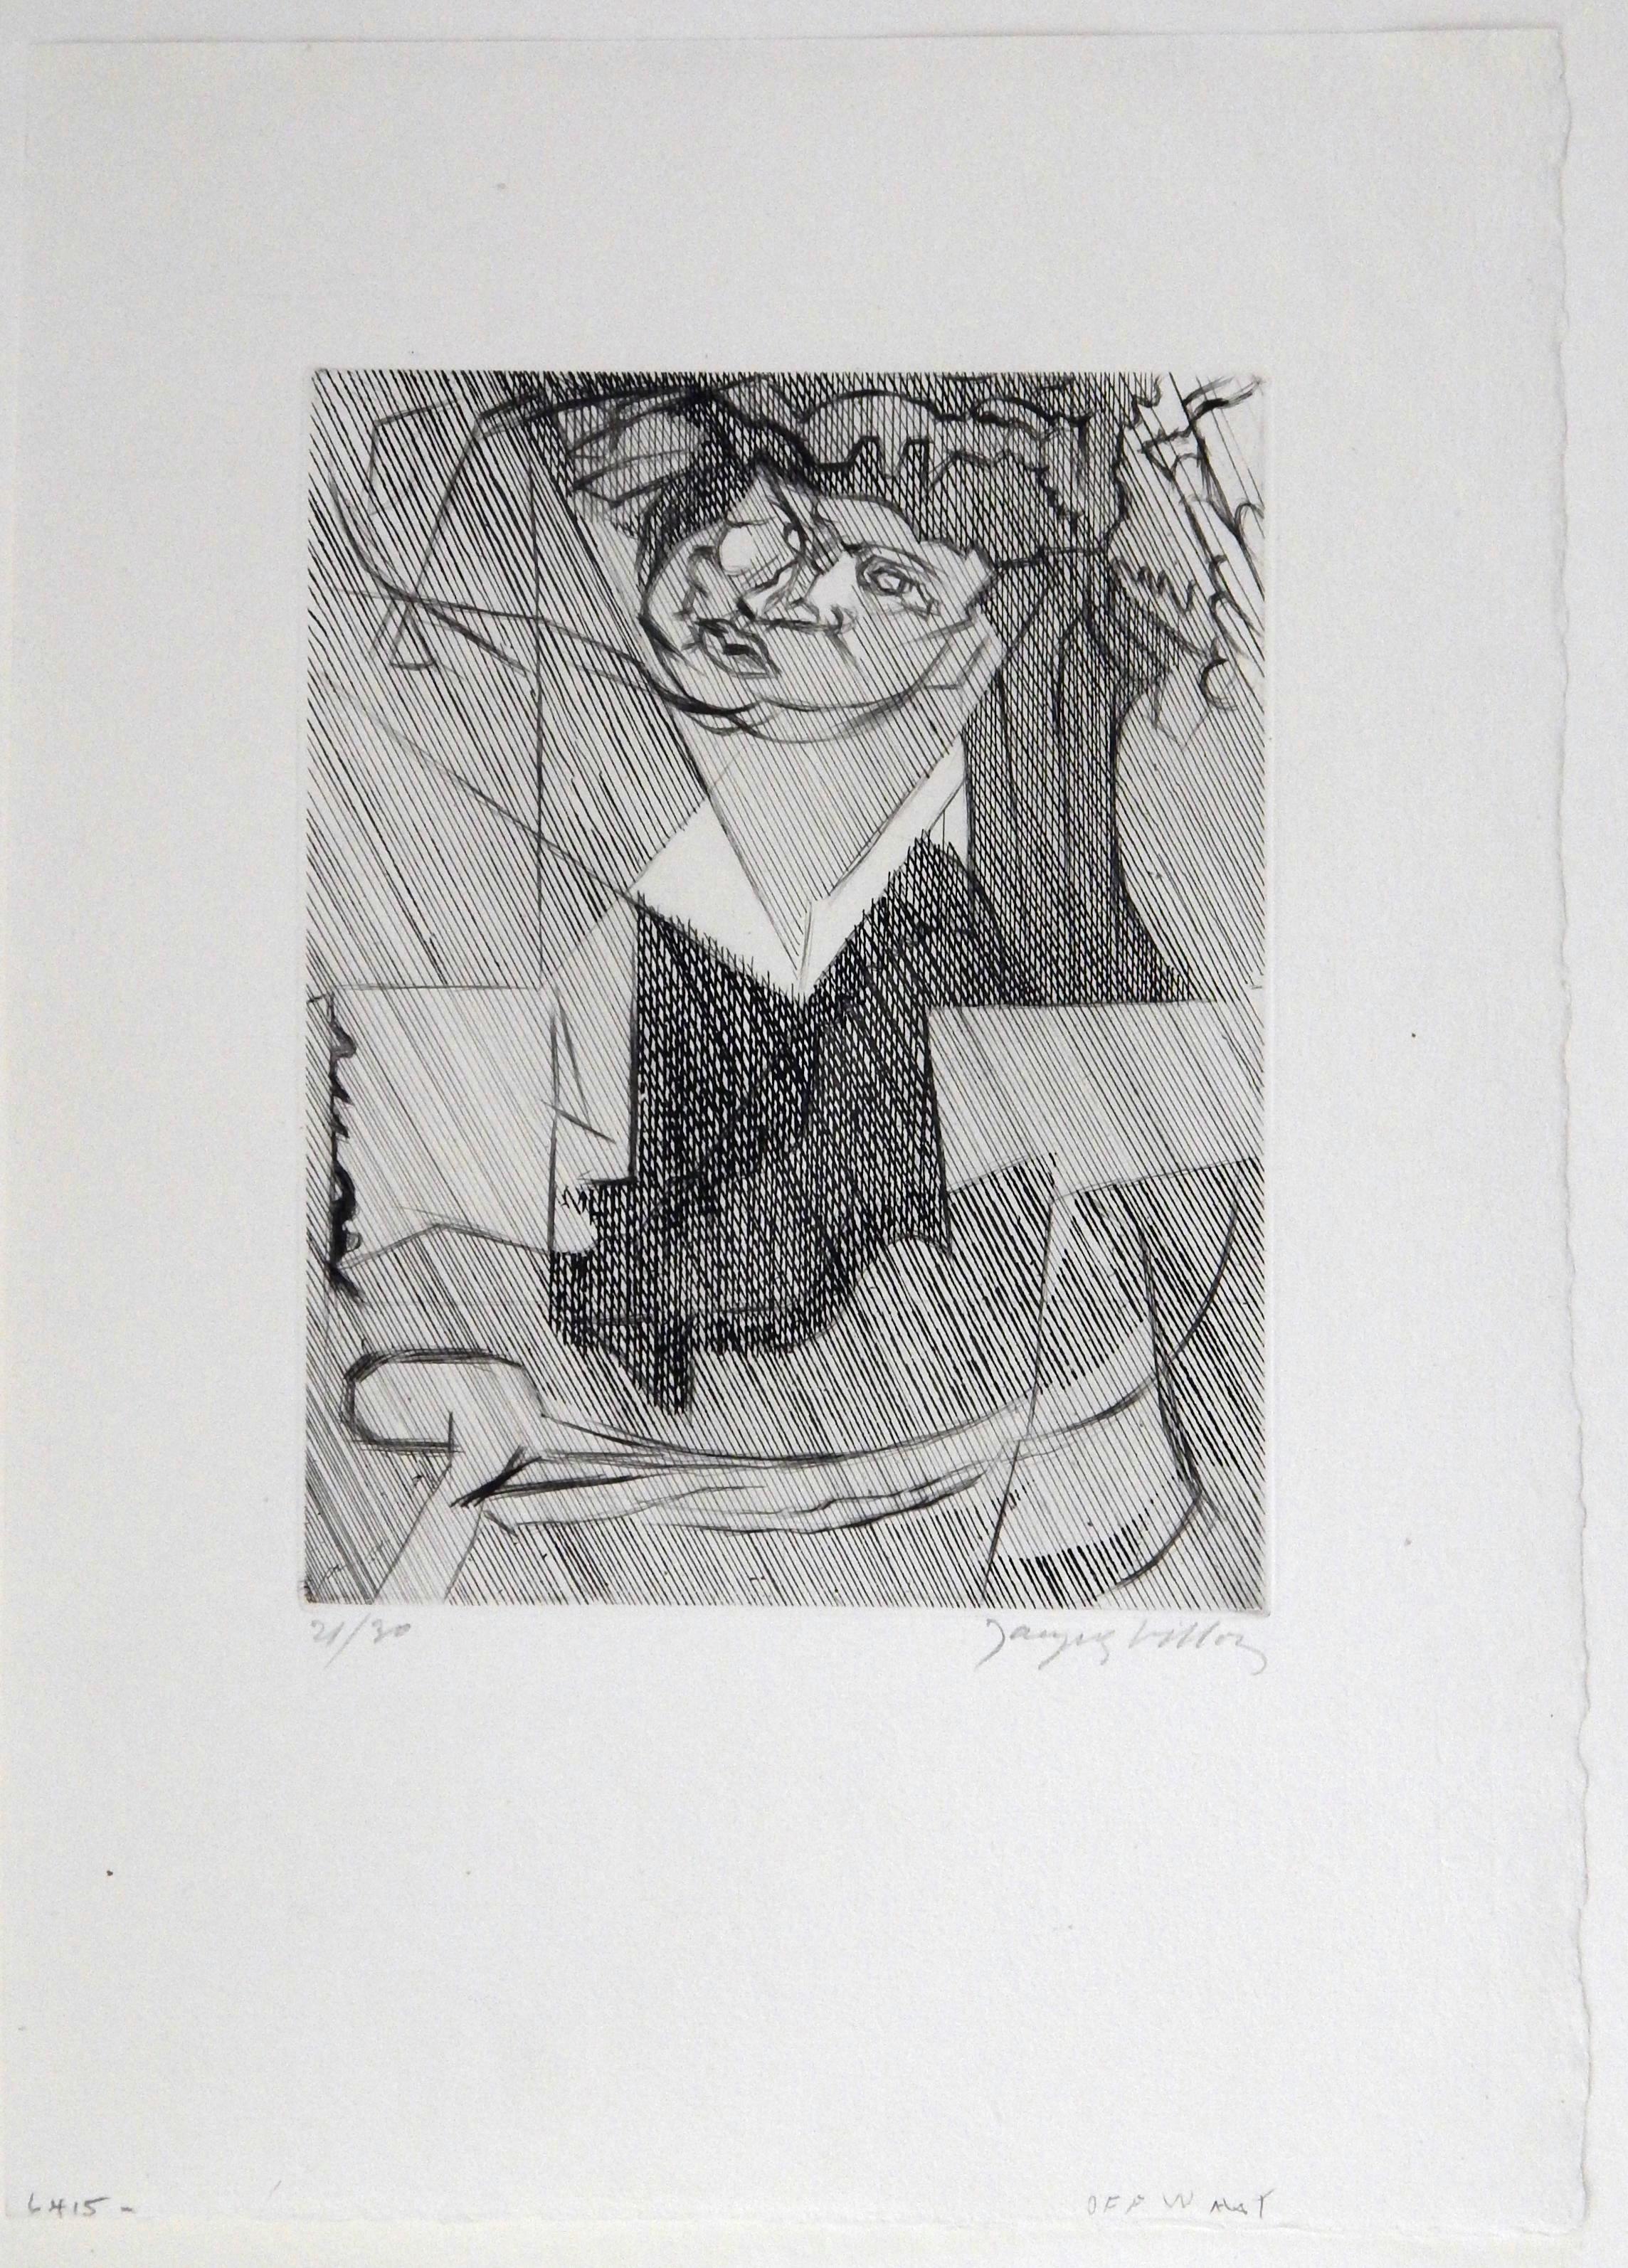 Jacques Villon original etching “Figure de Femme” in the Cubist Surreal style.
Hand signed and numbered. Small Edition, created 1951.
Edition of 30 of which this print is no. 21. Unmatted and unframed.
Measures: 9 3/4